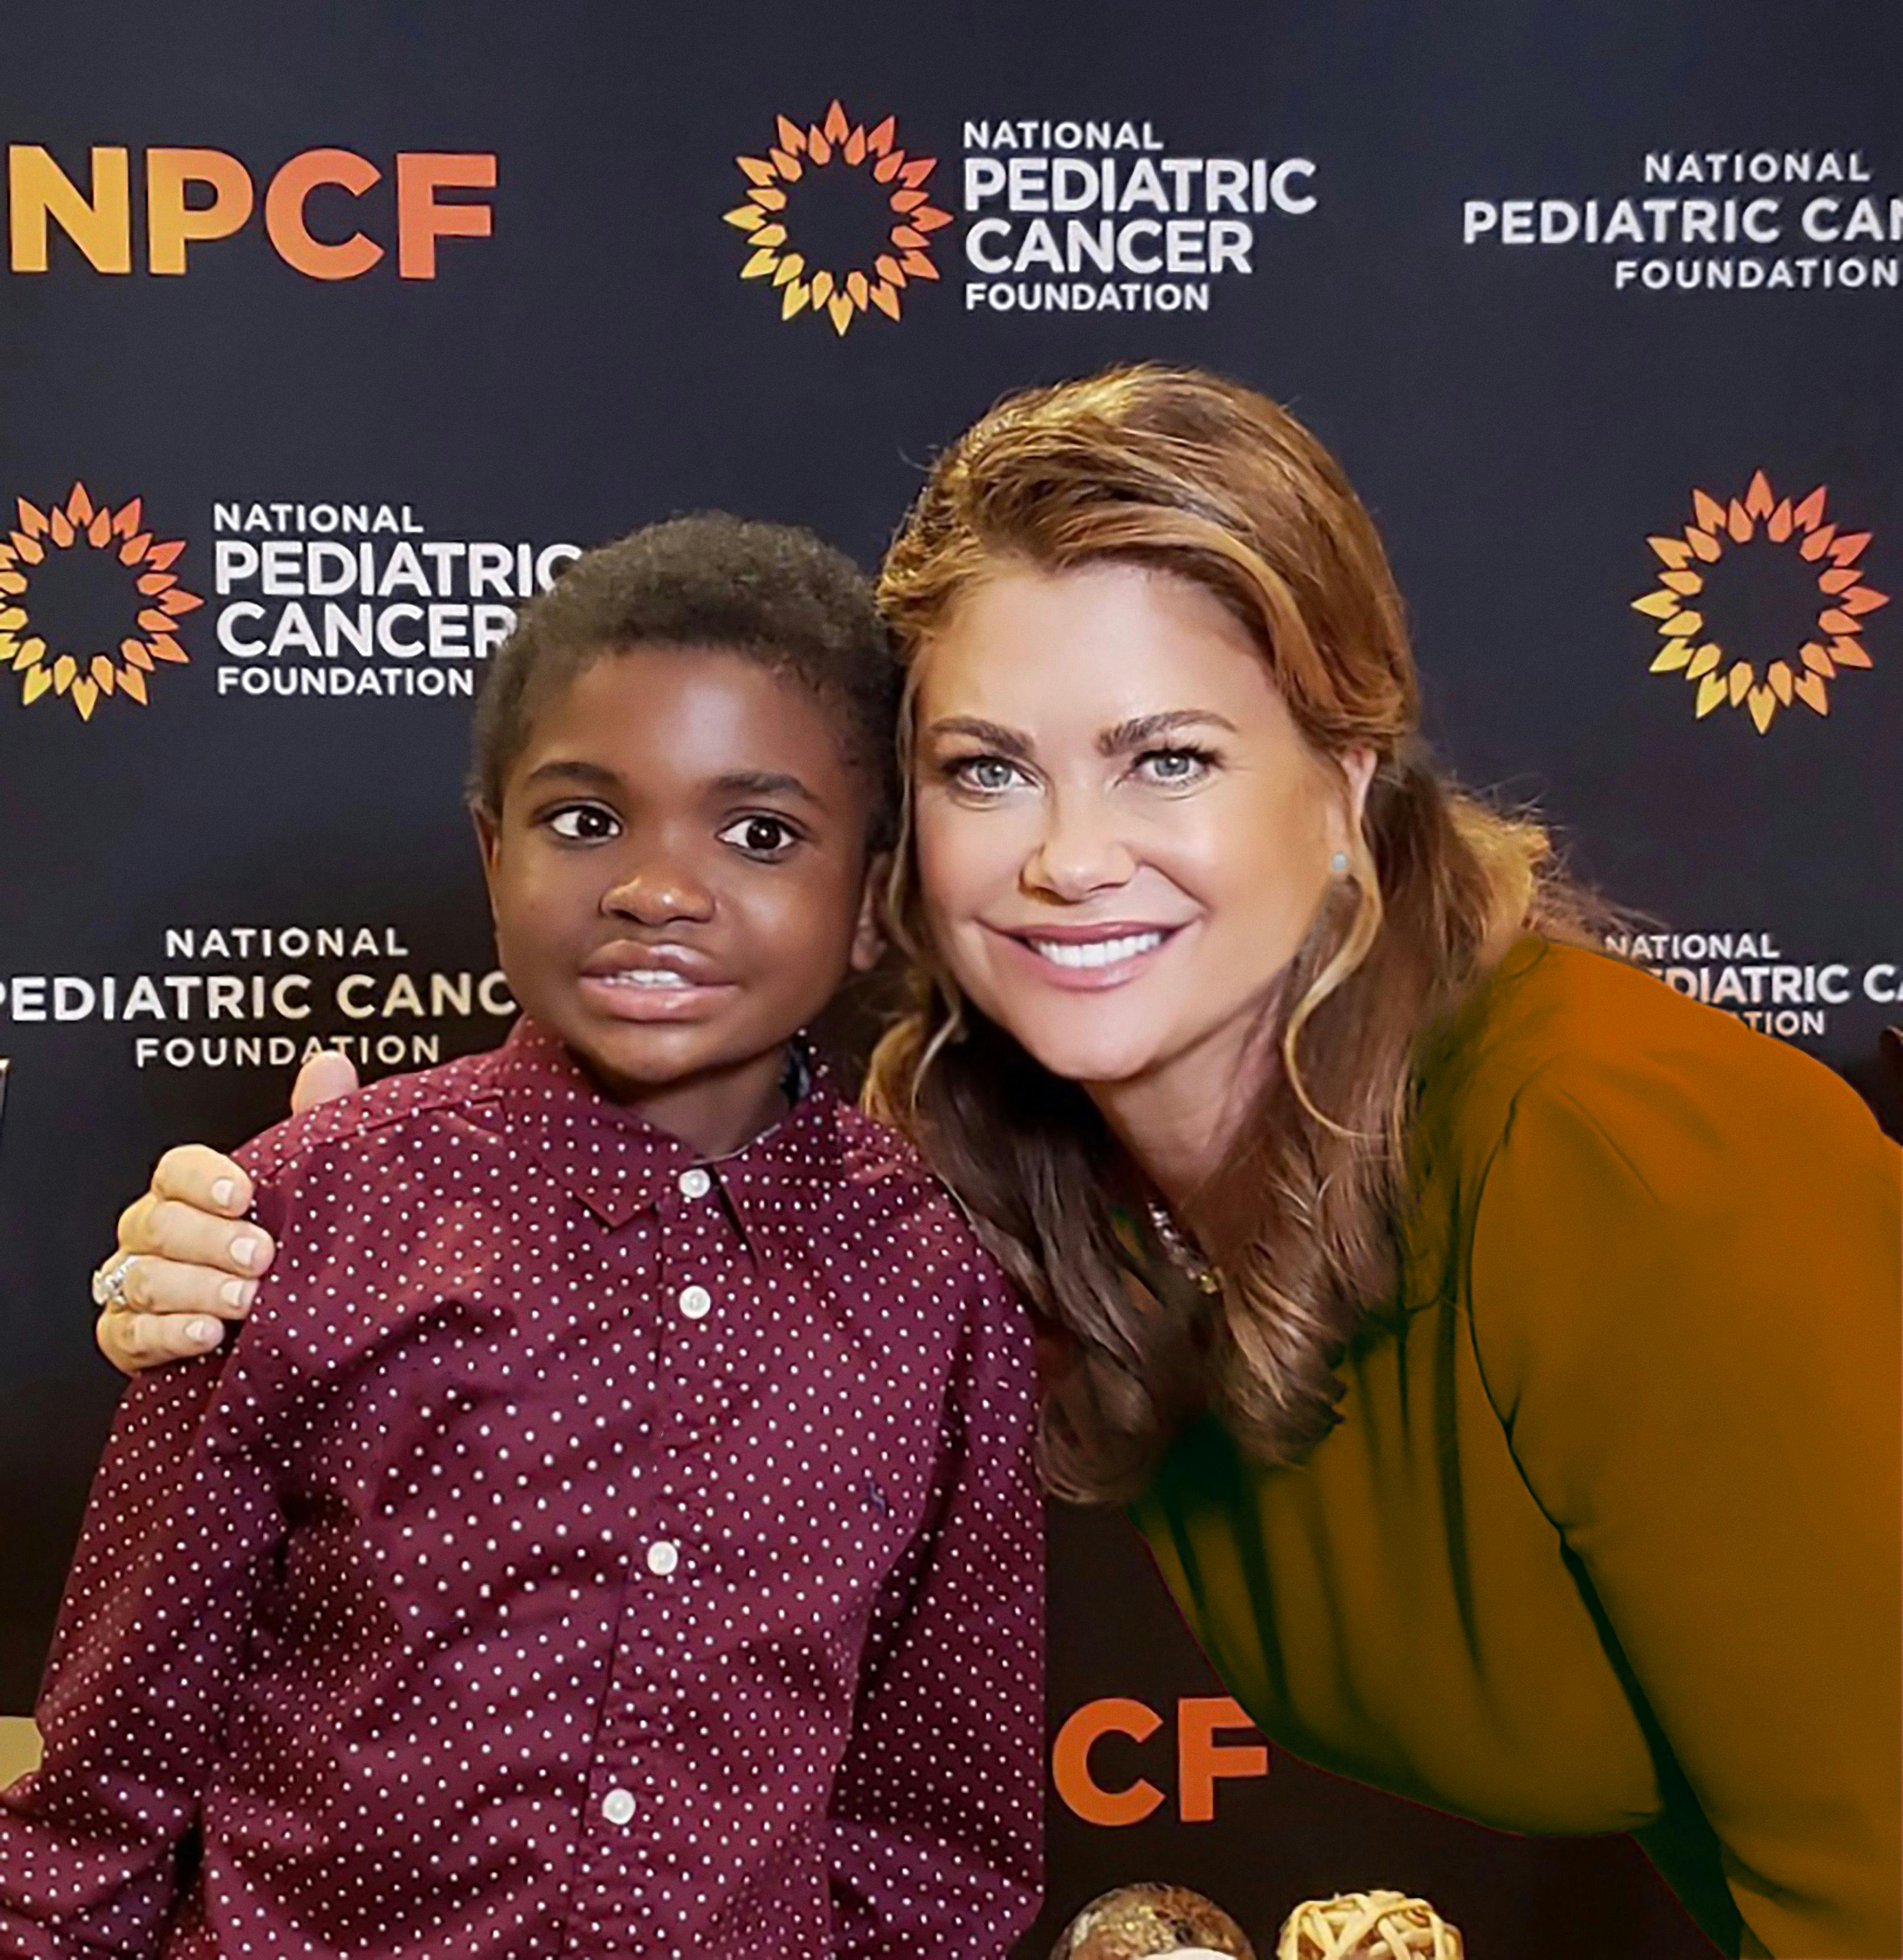 Kathy Ireland Joins the National Pediatric Cancer Foundation’s ‘Team 43’ to Raise Funds and Awareness